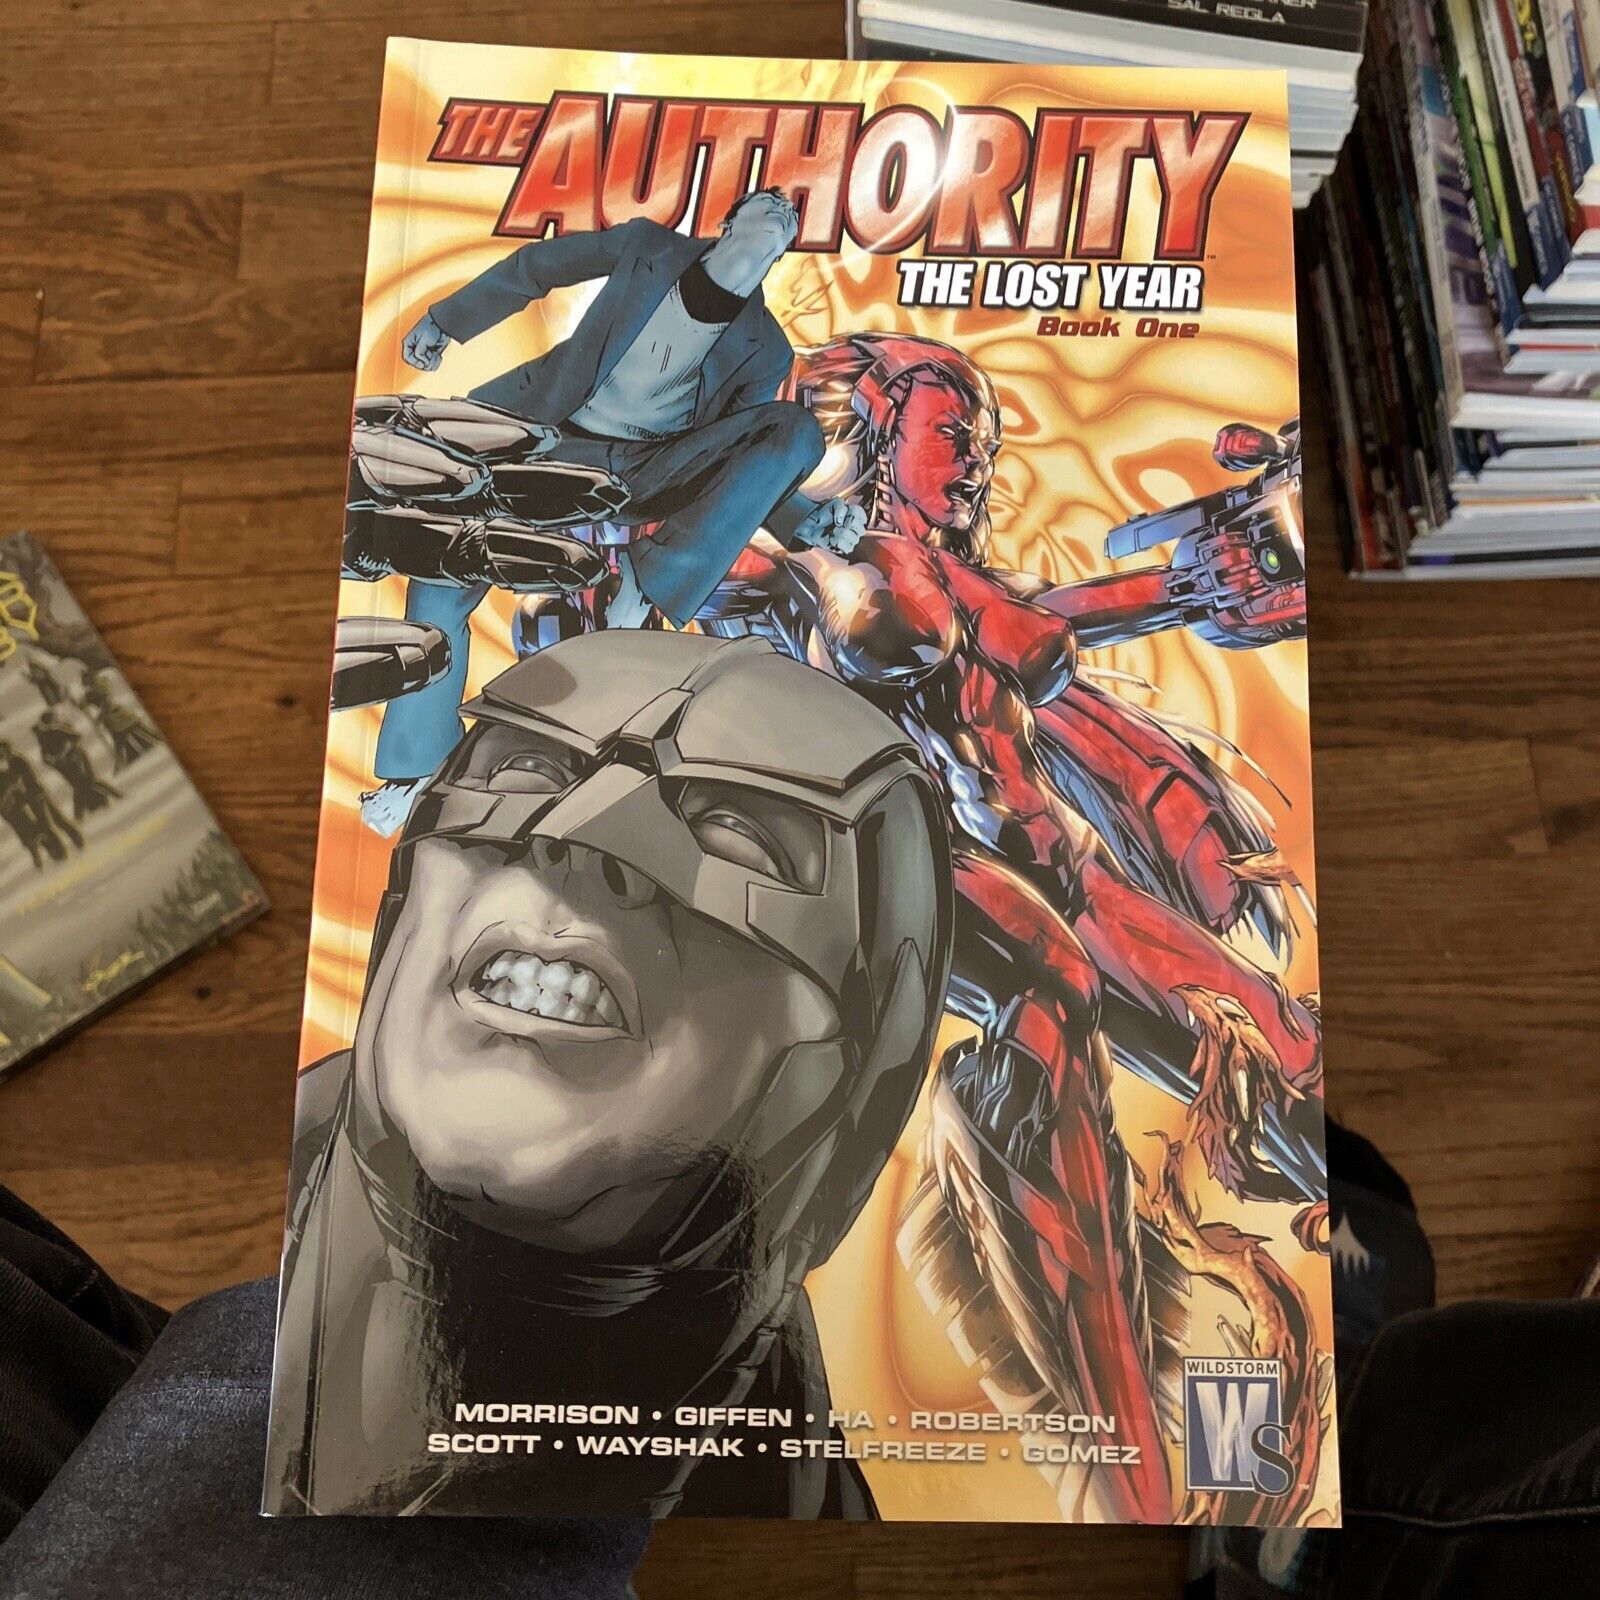 The Authority: The Lost Year #1 (DC Comics, August 2010)